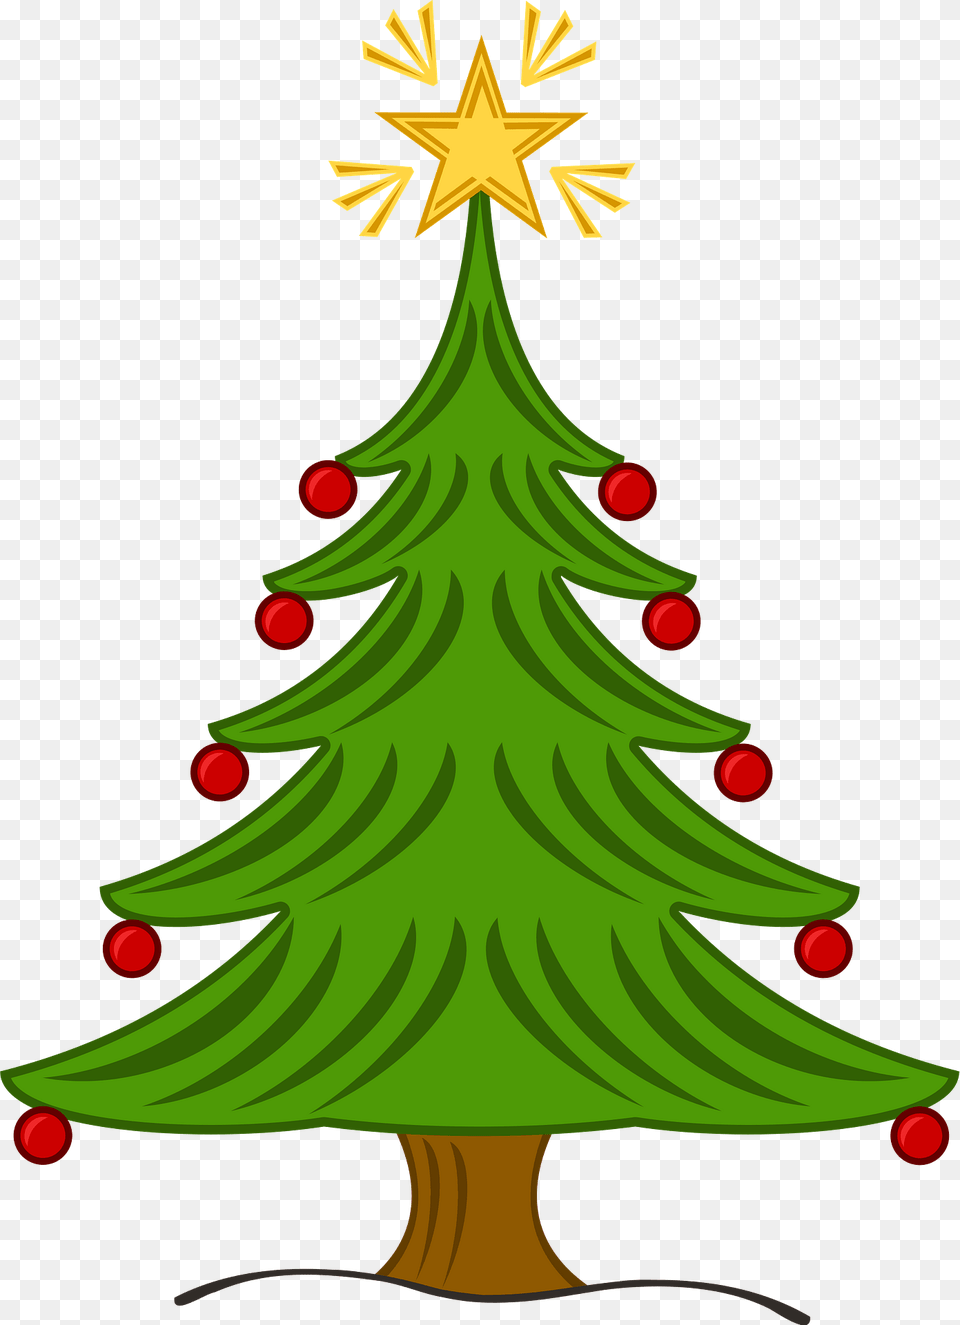 Christmas Tree With Ornaments And A Star Clipart, Plant, Christmas Decorations, Festival, Christmas Tree Free Transparent Png